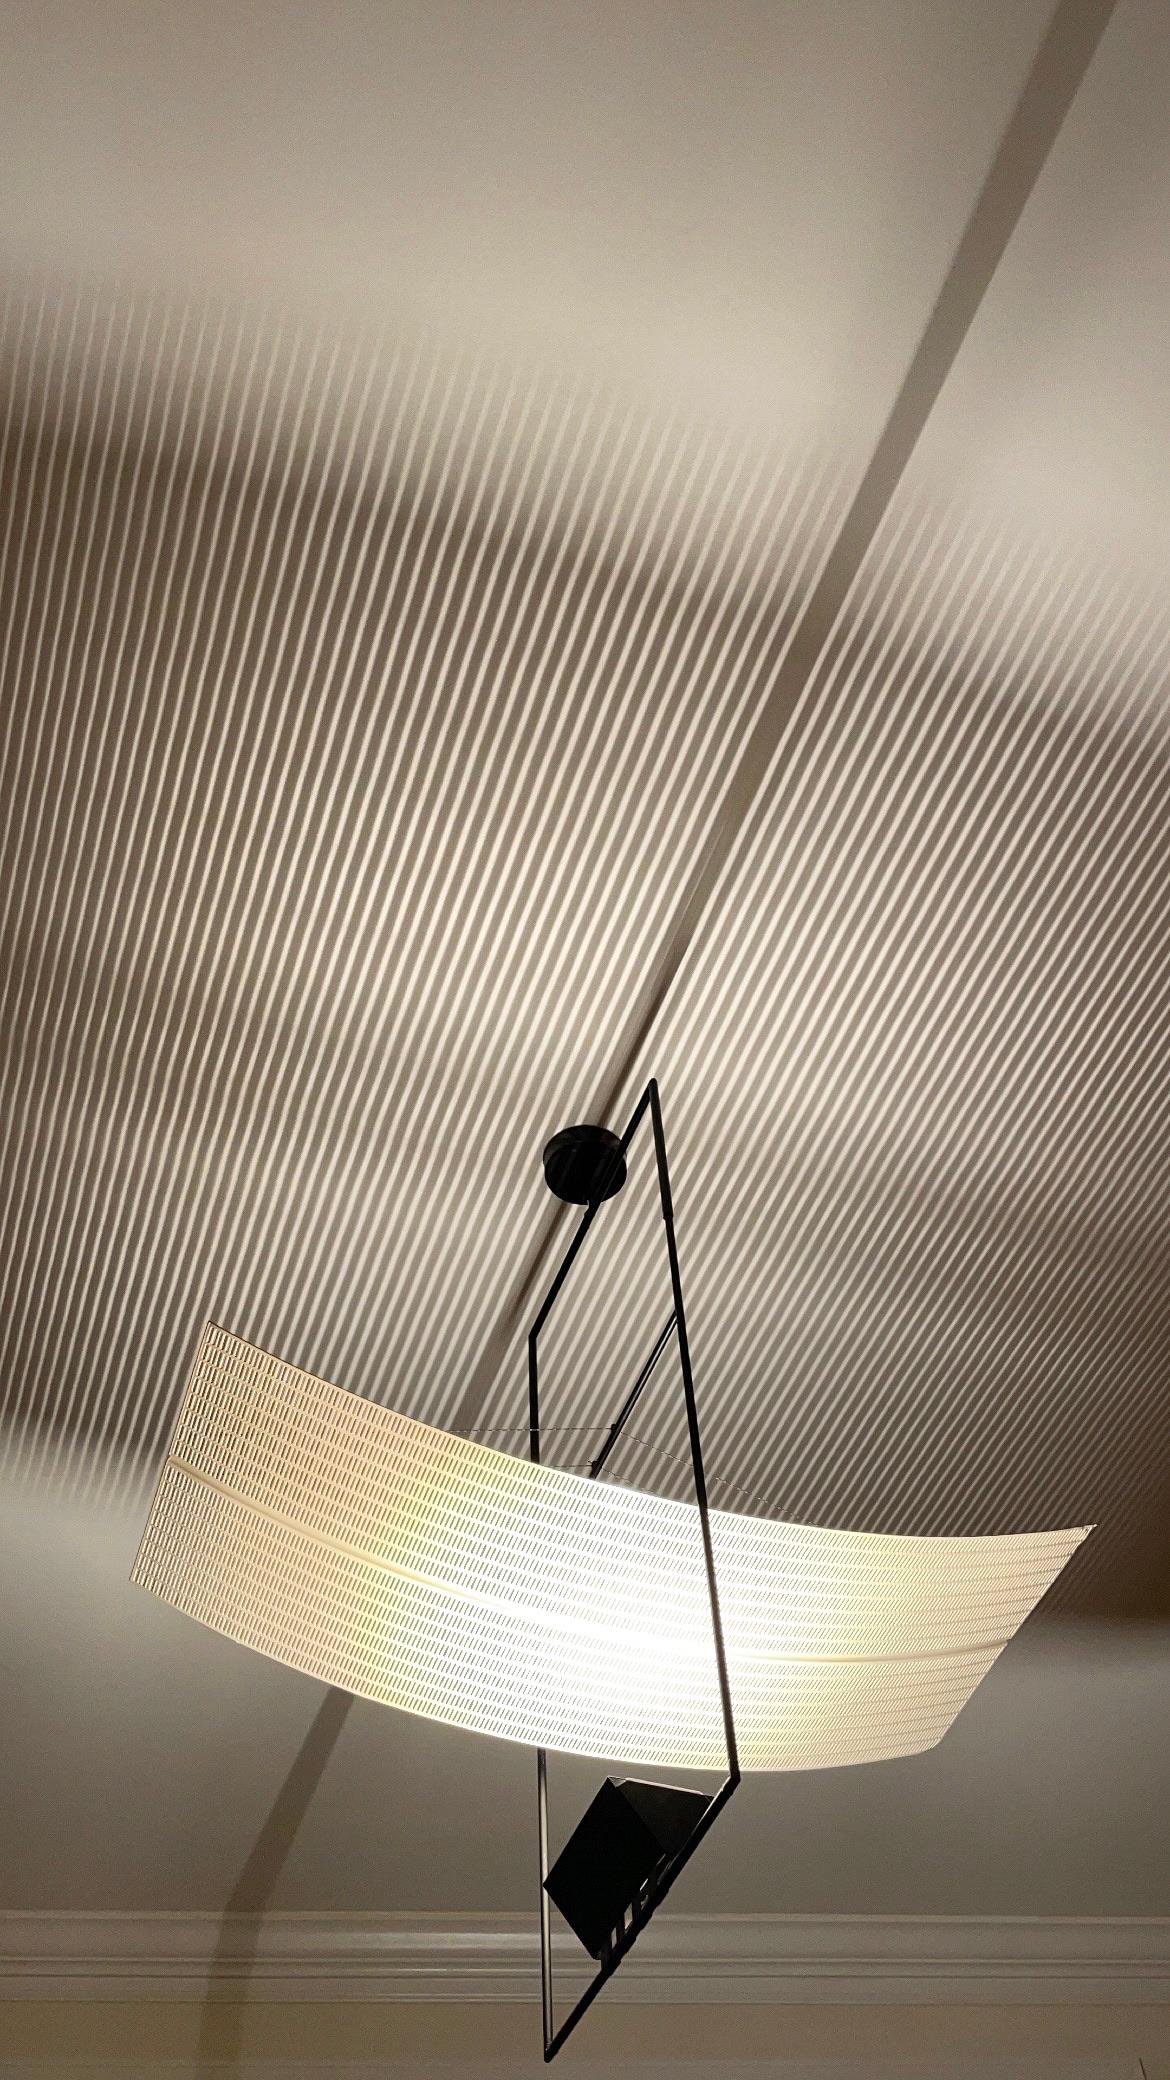 This suspension, model Zefiro, was designed by the Swiss designer Mario Botta in 1988 and then produced by Artemide. It is composed of a tubular structure in black lacquered metal on which rests a white reflector in curved perforated metal.

This